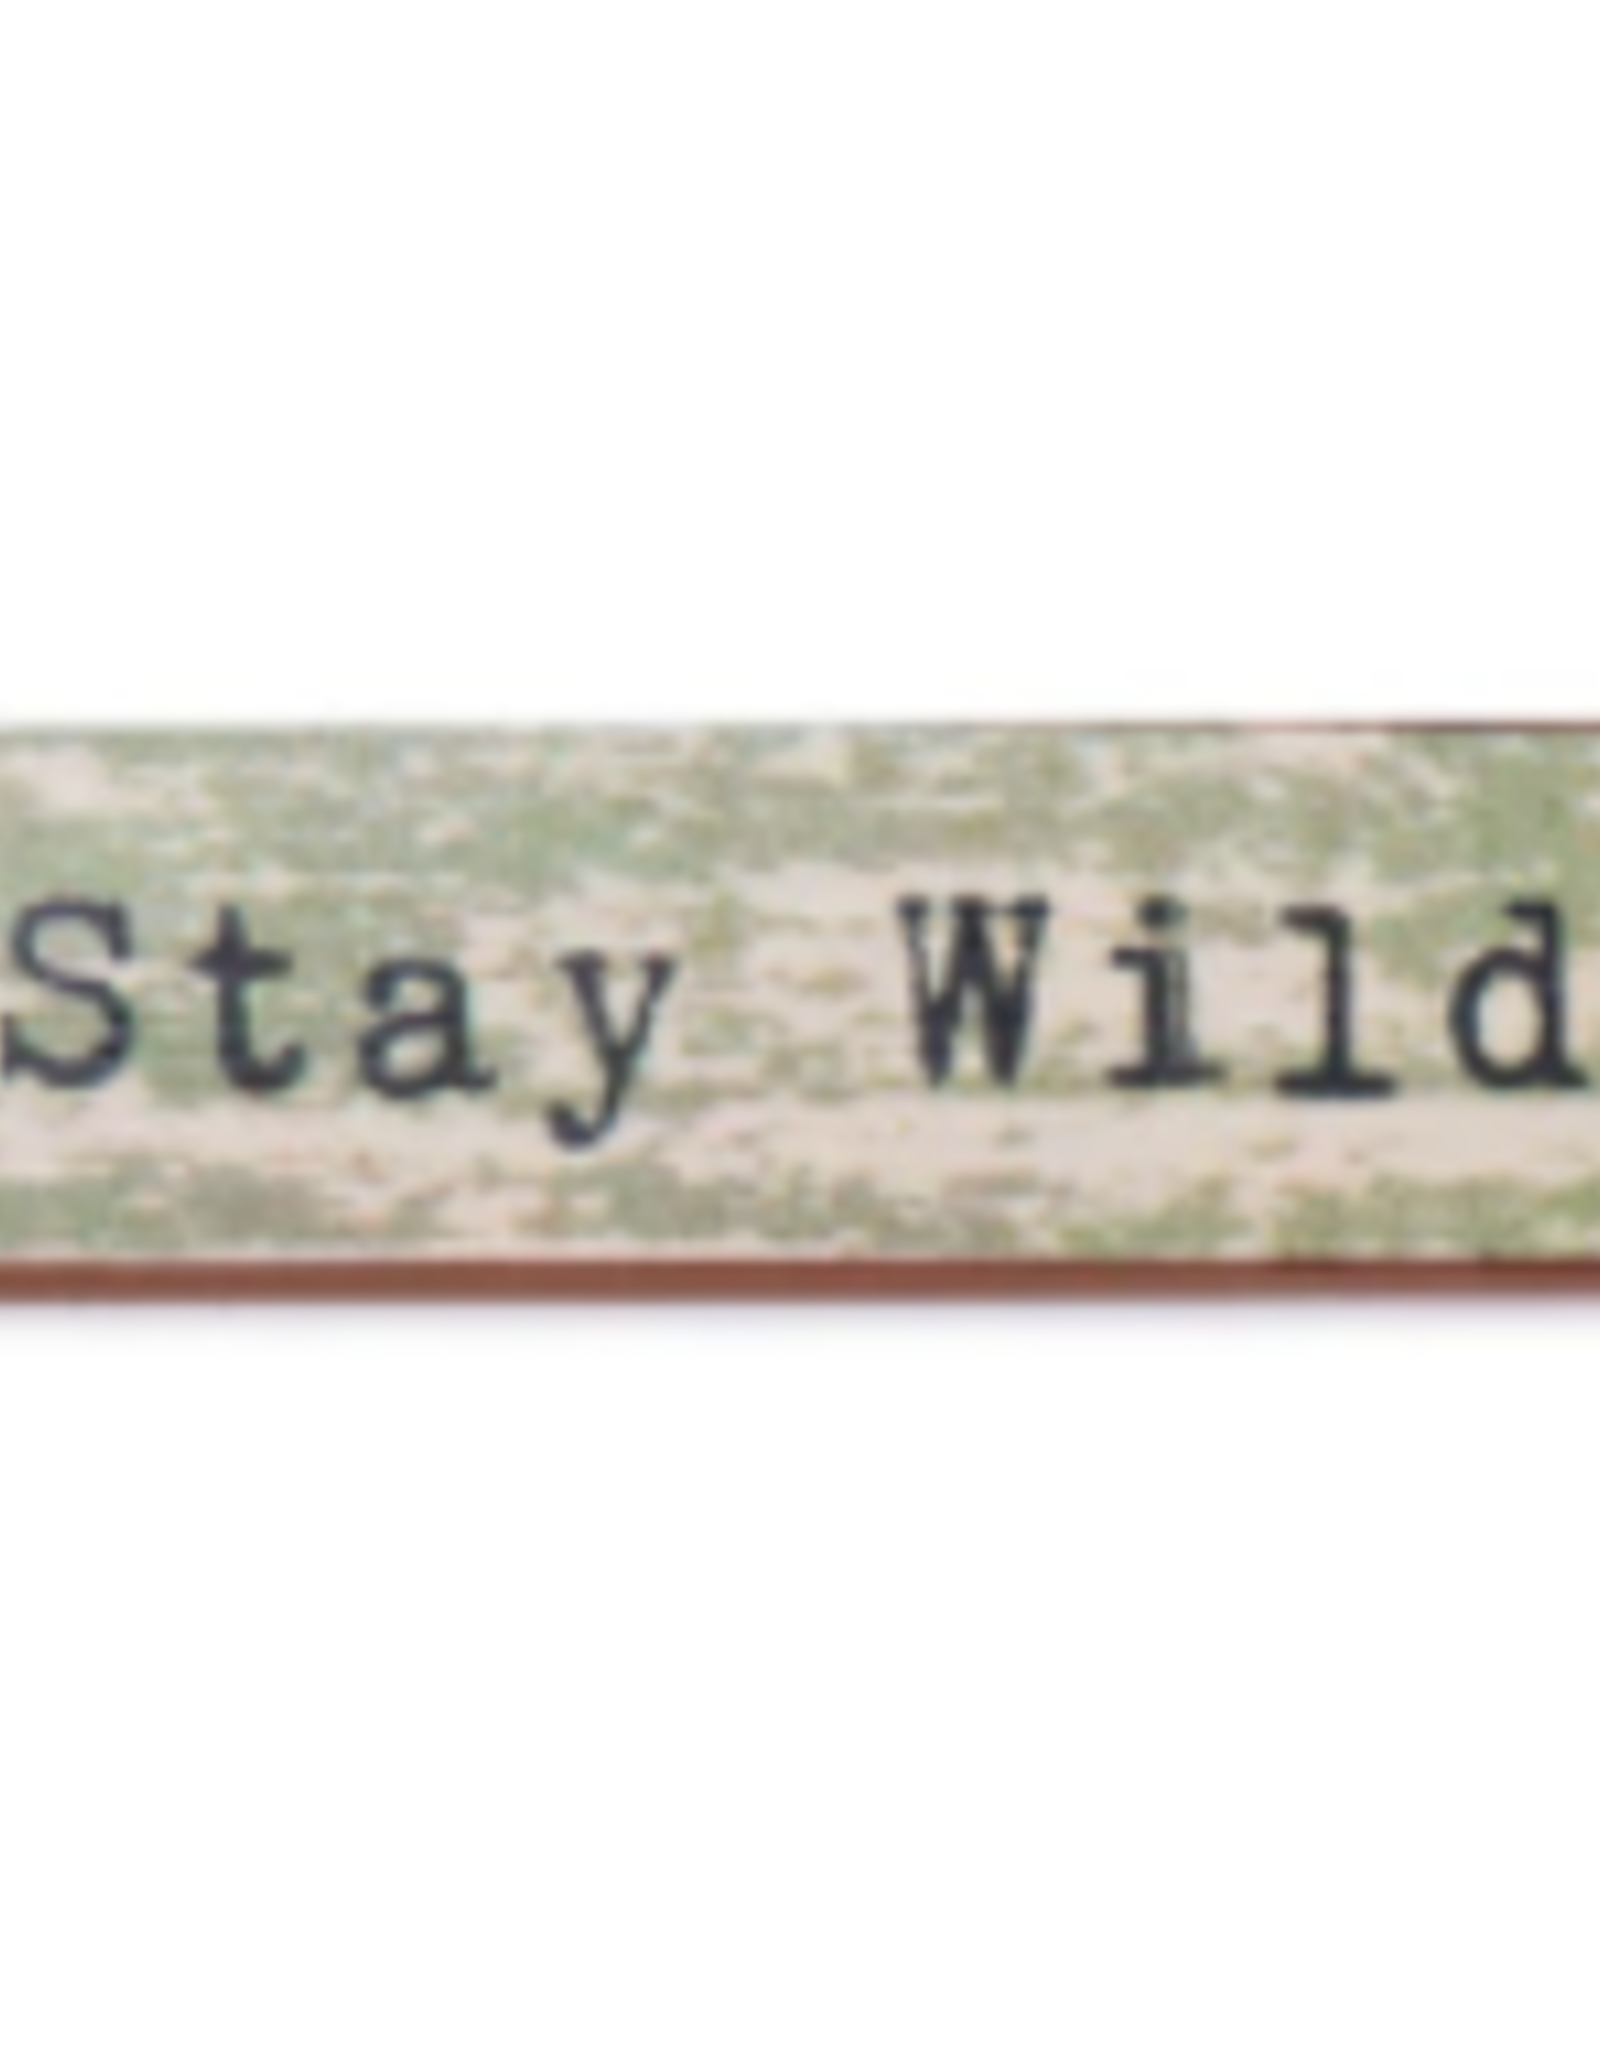 Cedar Mountain Timber Magnets - Stay Wild